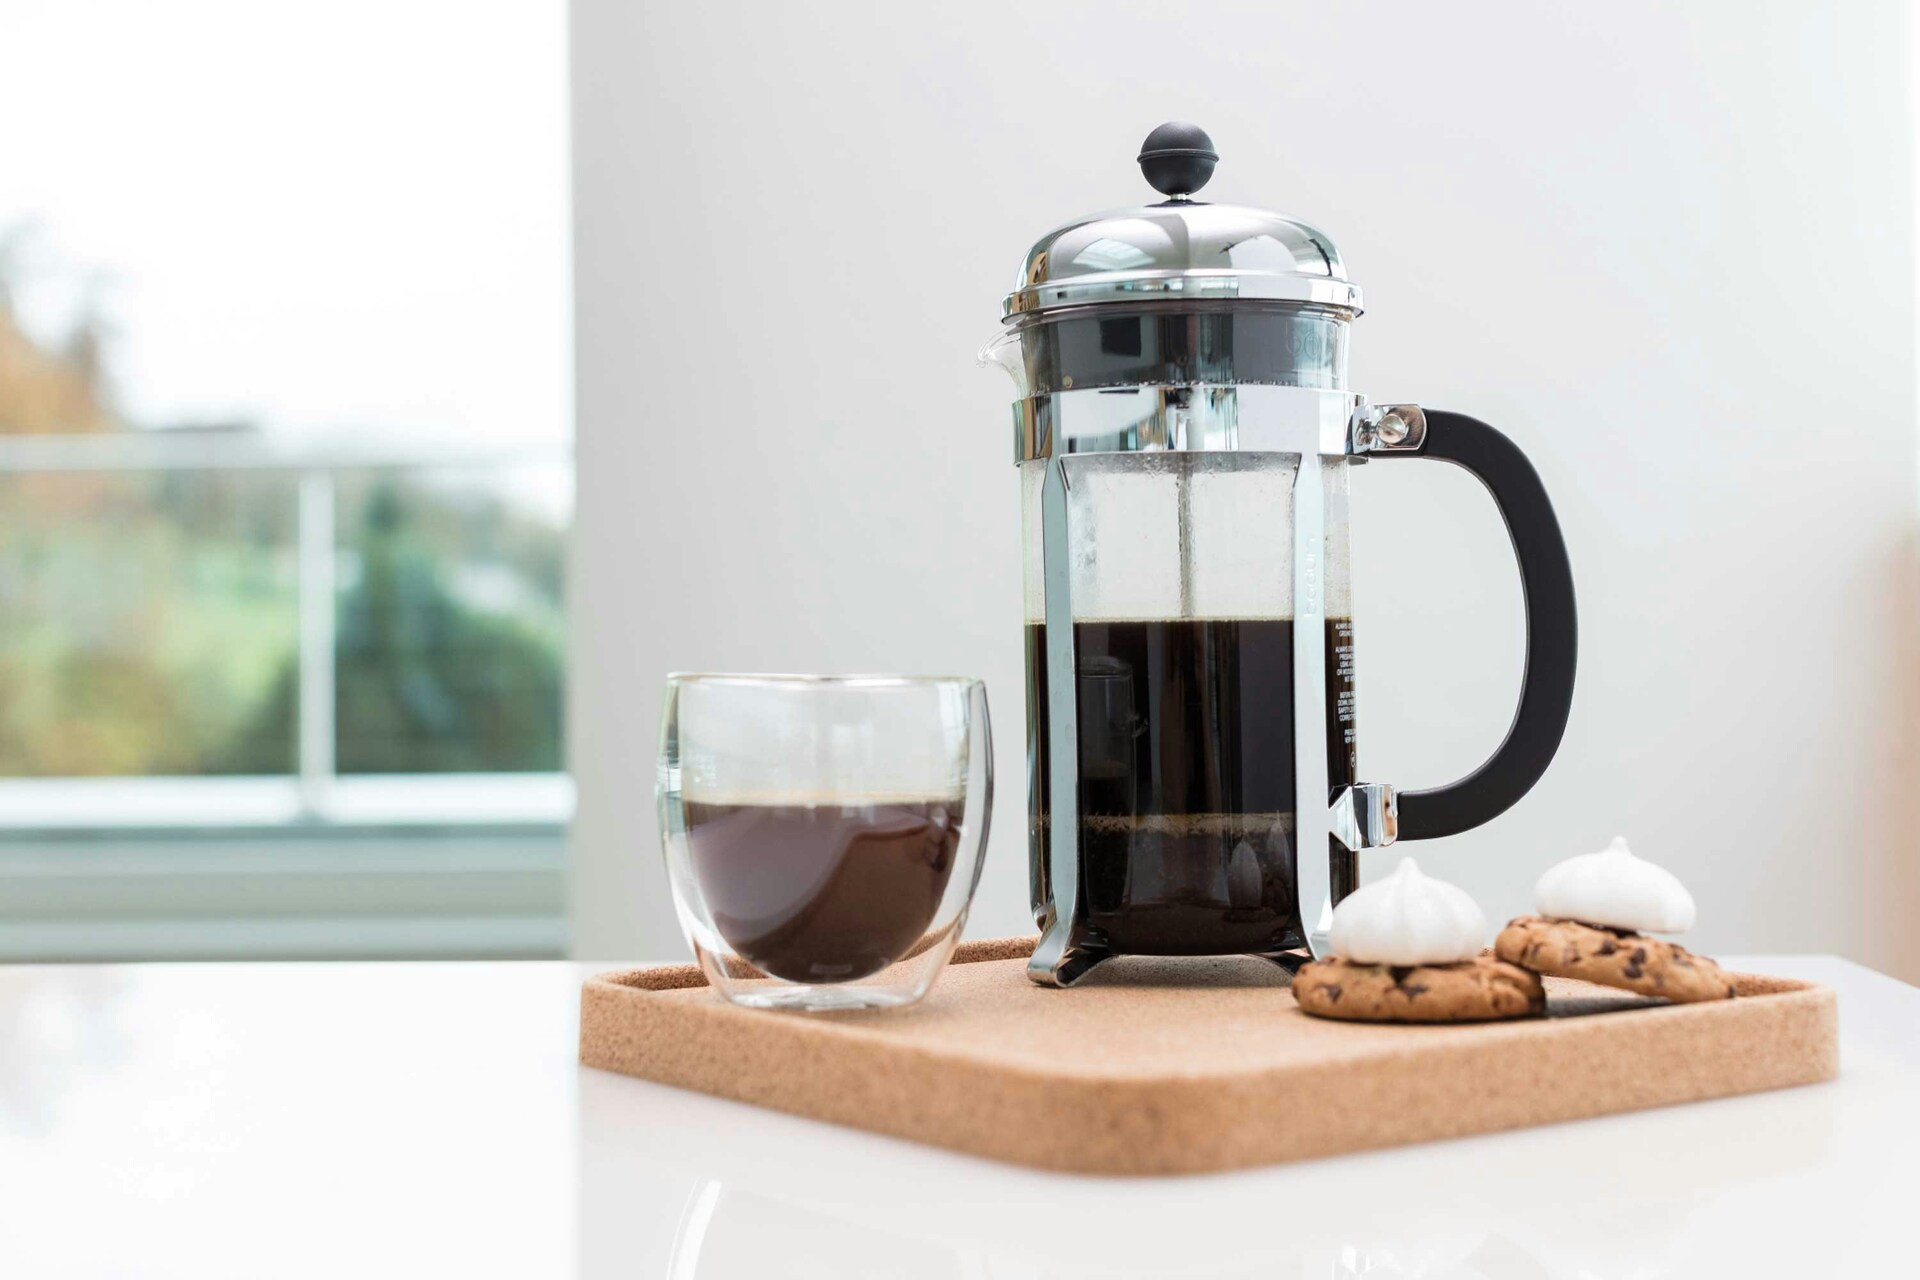 Bodum Double Wall Glass Review - Better than Nespresso Cups and